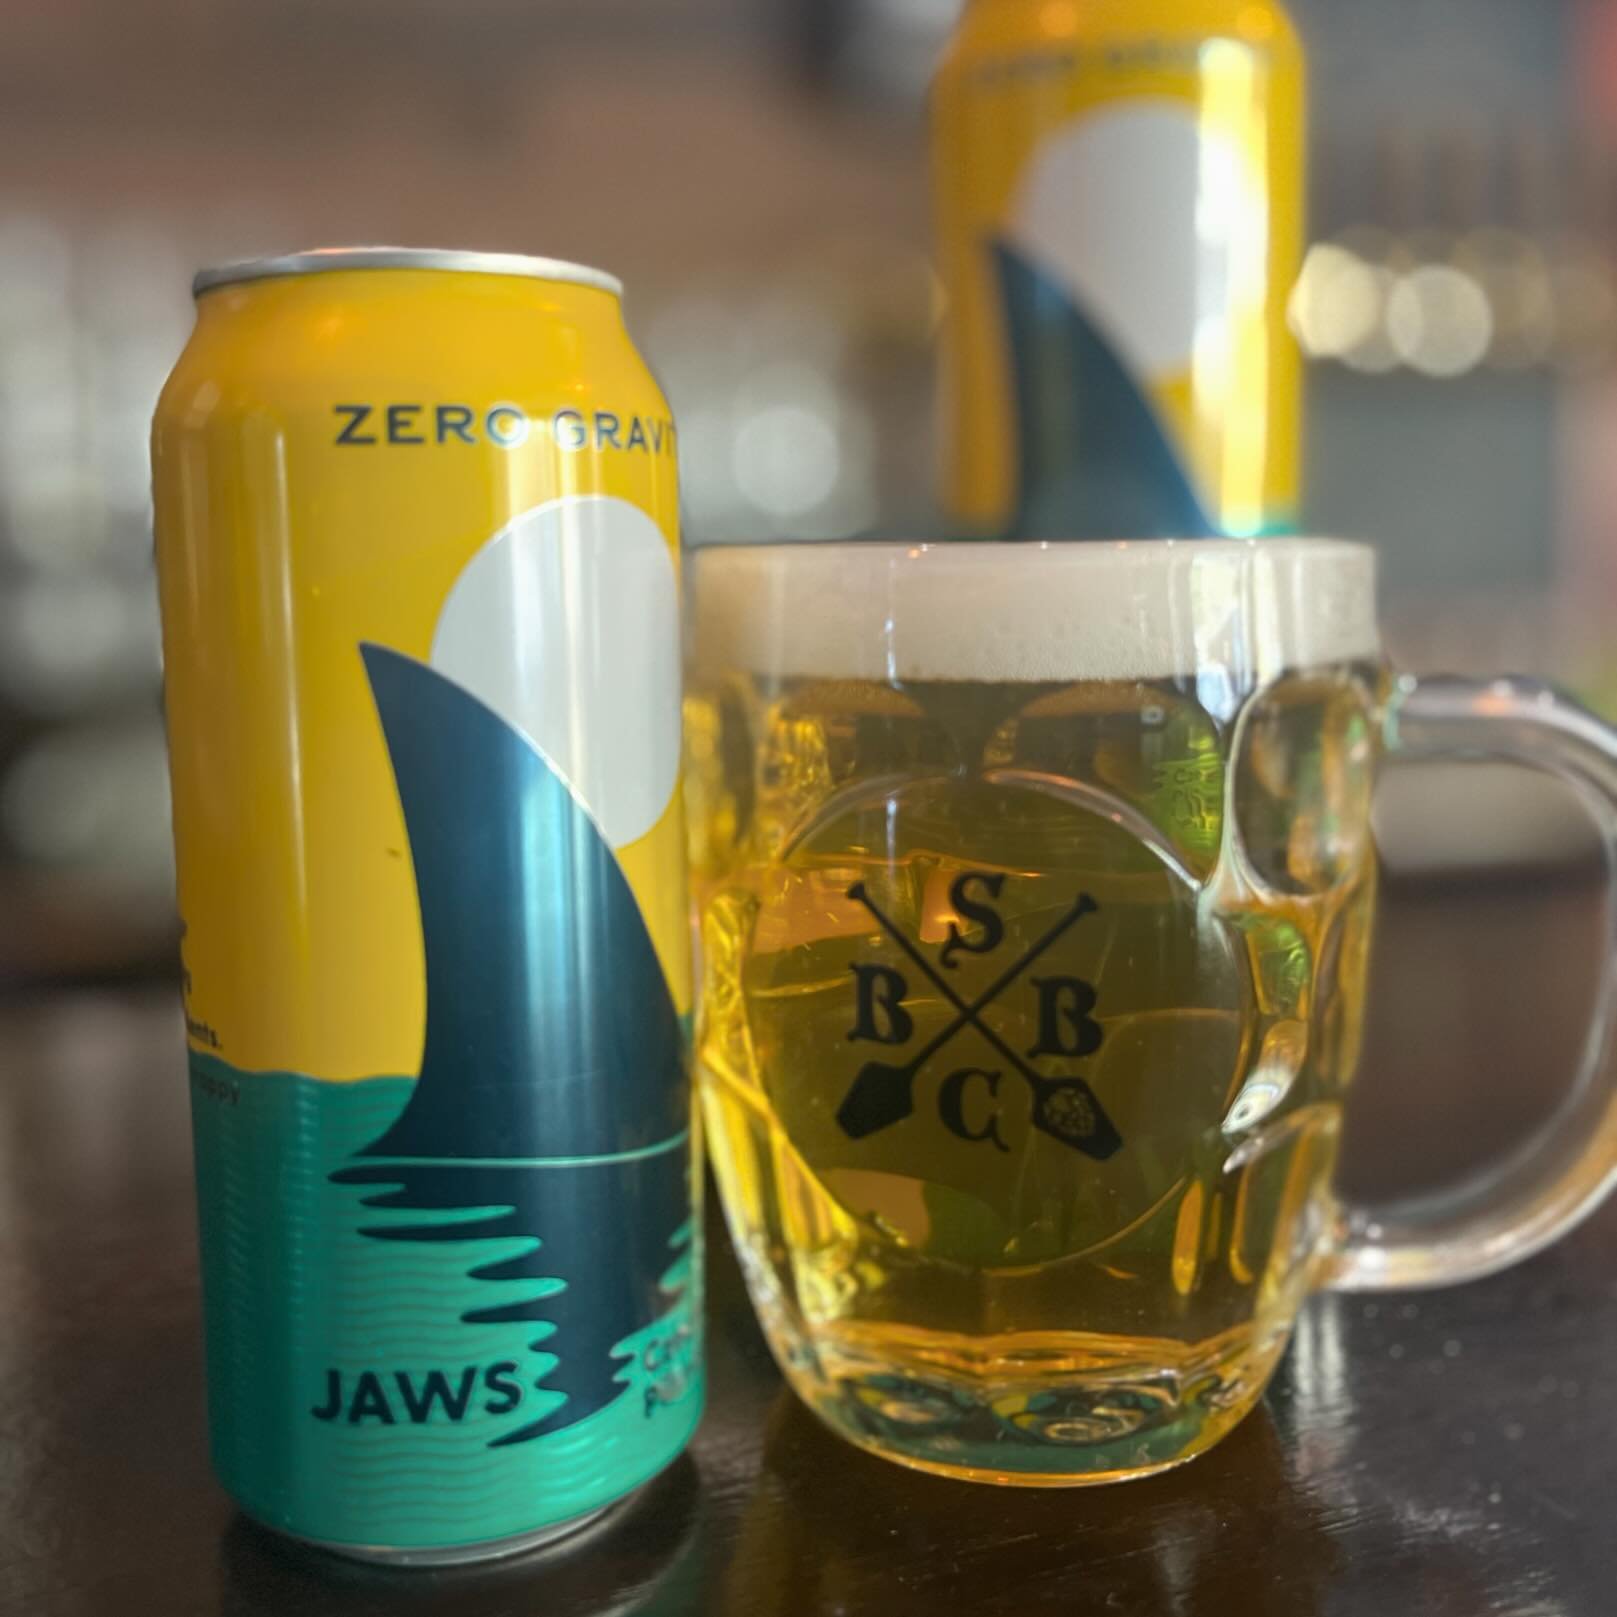 Now on draft and in cans, Jaws, a delicious Czech style Pilsner from Zero Gravity. It's awesome can design is only surpassed by its awesome flavor. Oh and it's on the Lukr so it's somehow just that much better. Cheers
.
.
.
#simcoe #simcoebeerbar #cr